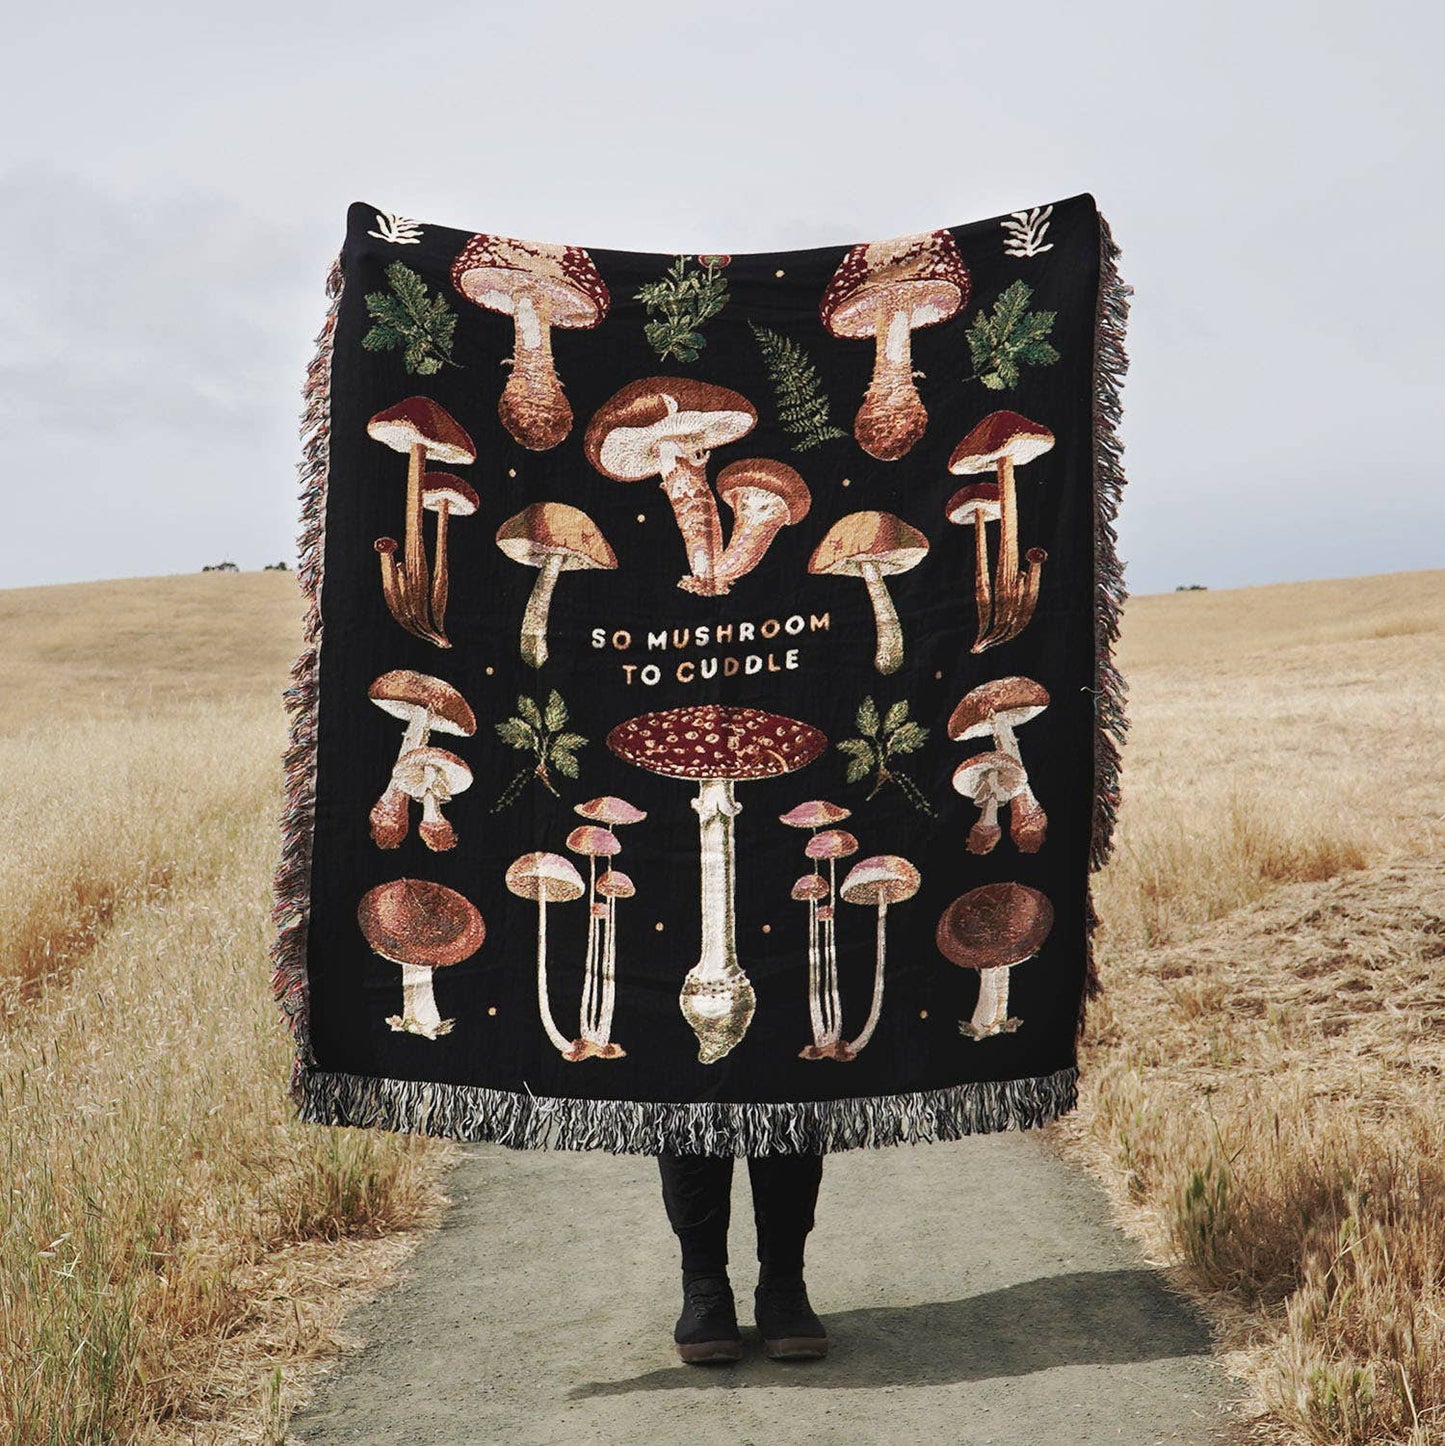 Mushroom throw blanket with various mushrooms and foliage on it with text that reads "So Mushroom To Cuddle" 